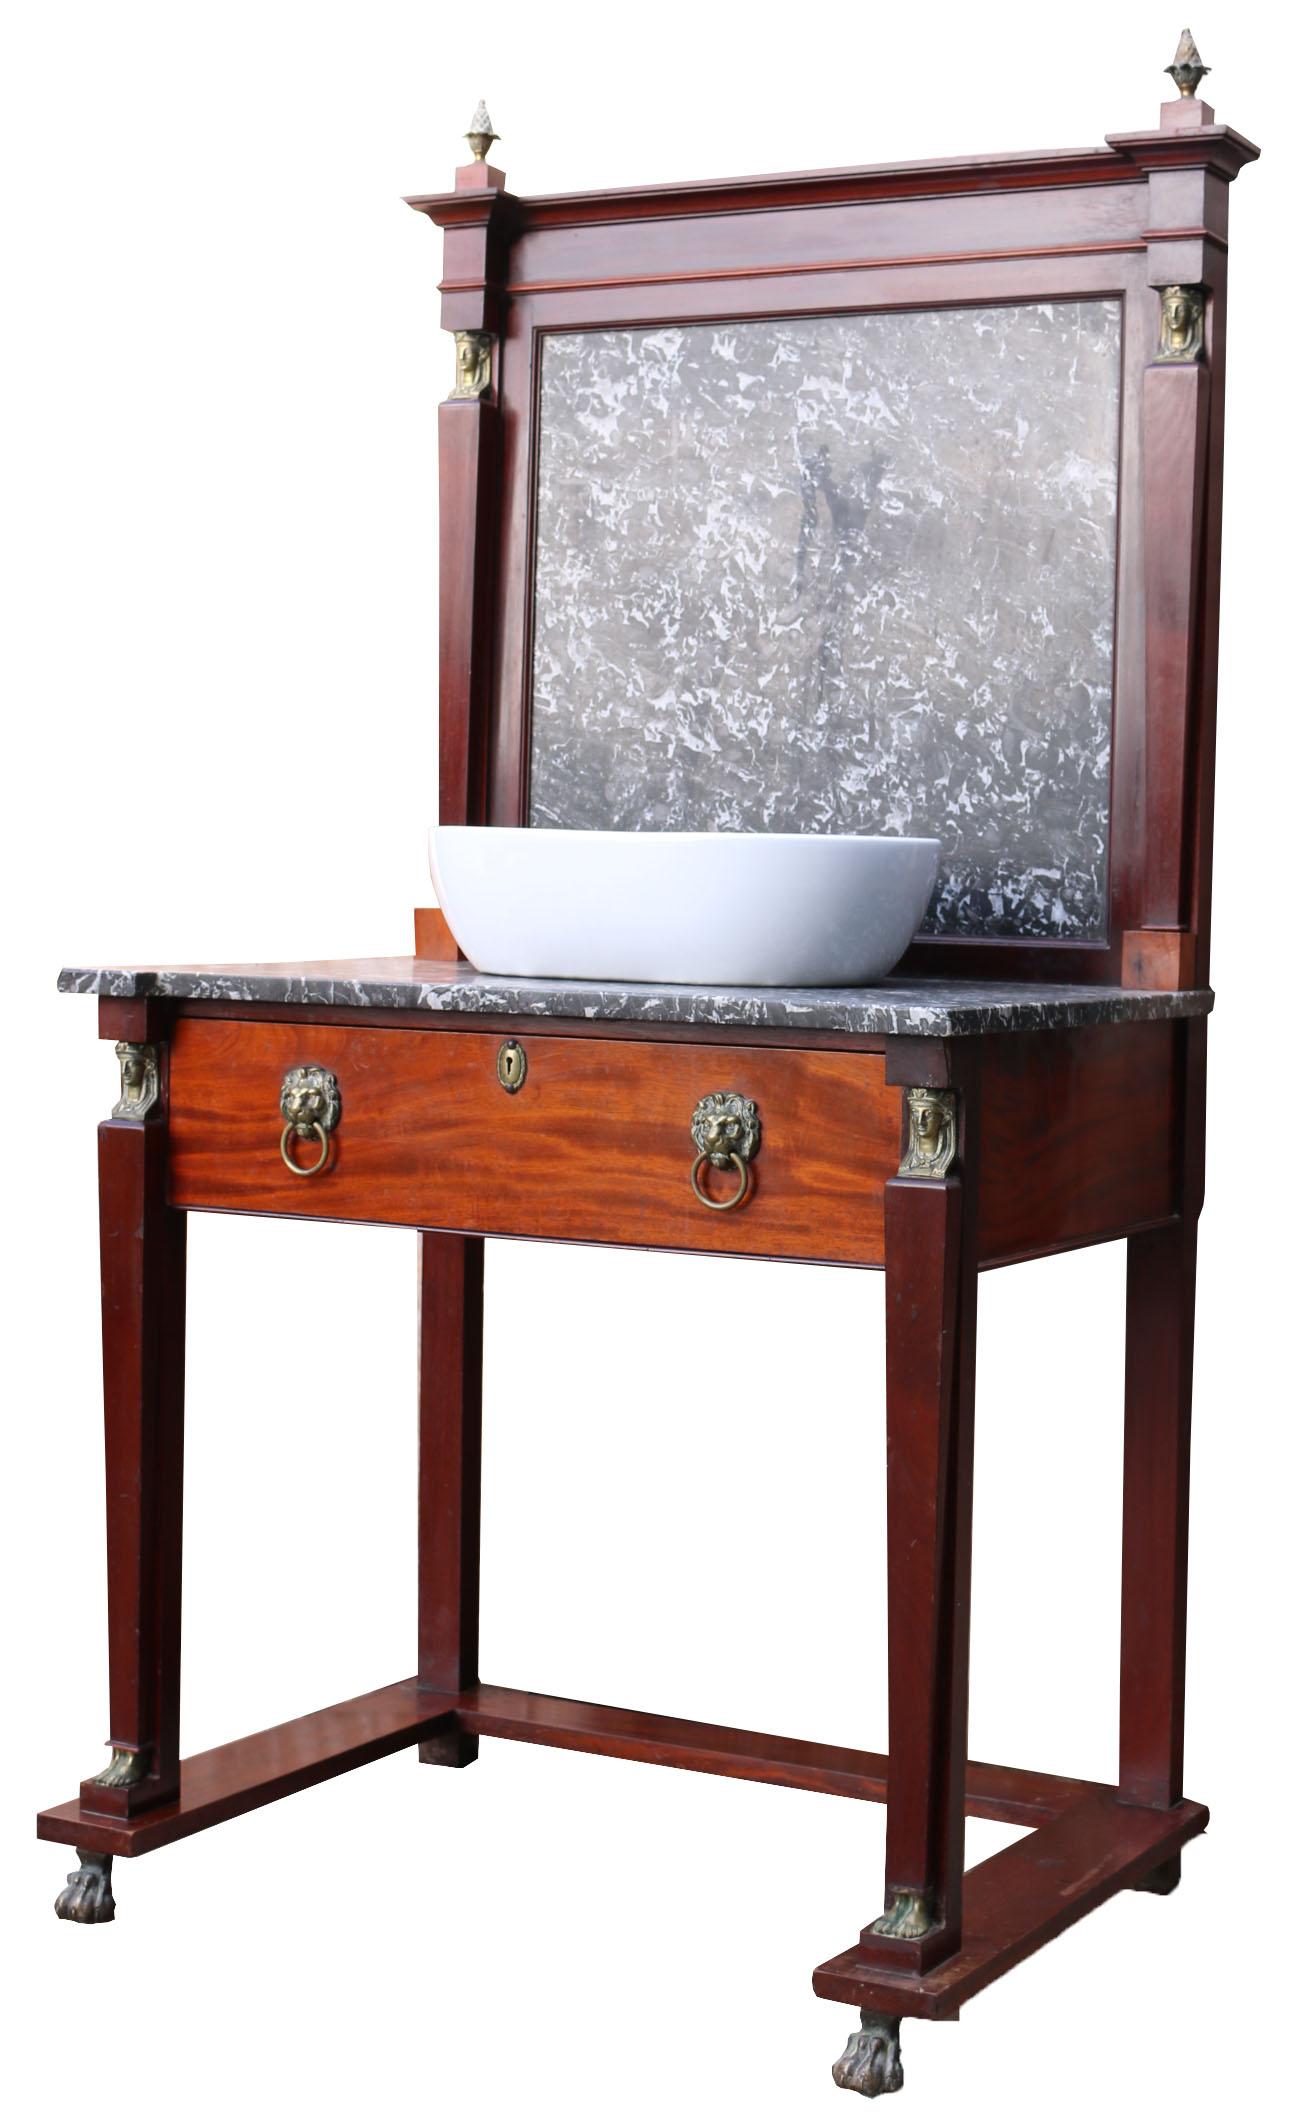 This beautiful washstand is made from mahogany and a grey/white marble with brass embellishments in the Egyptian taste. The basin is made from porcelain but has not been fitted.

We have paired this original wash stand with a modern basin to show